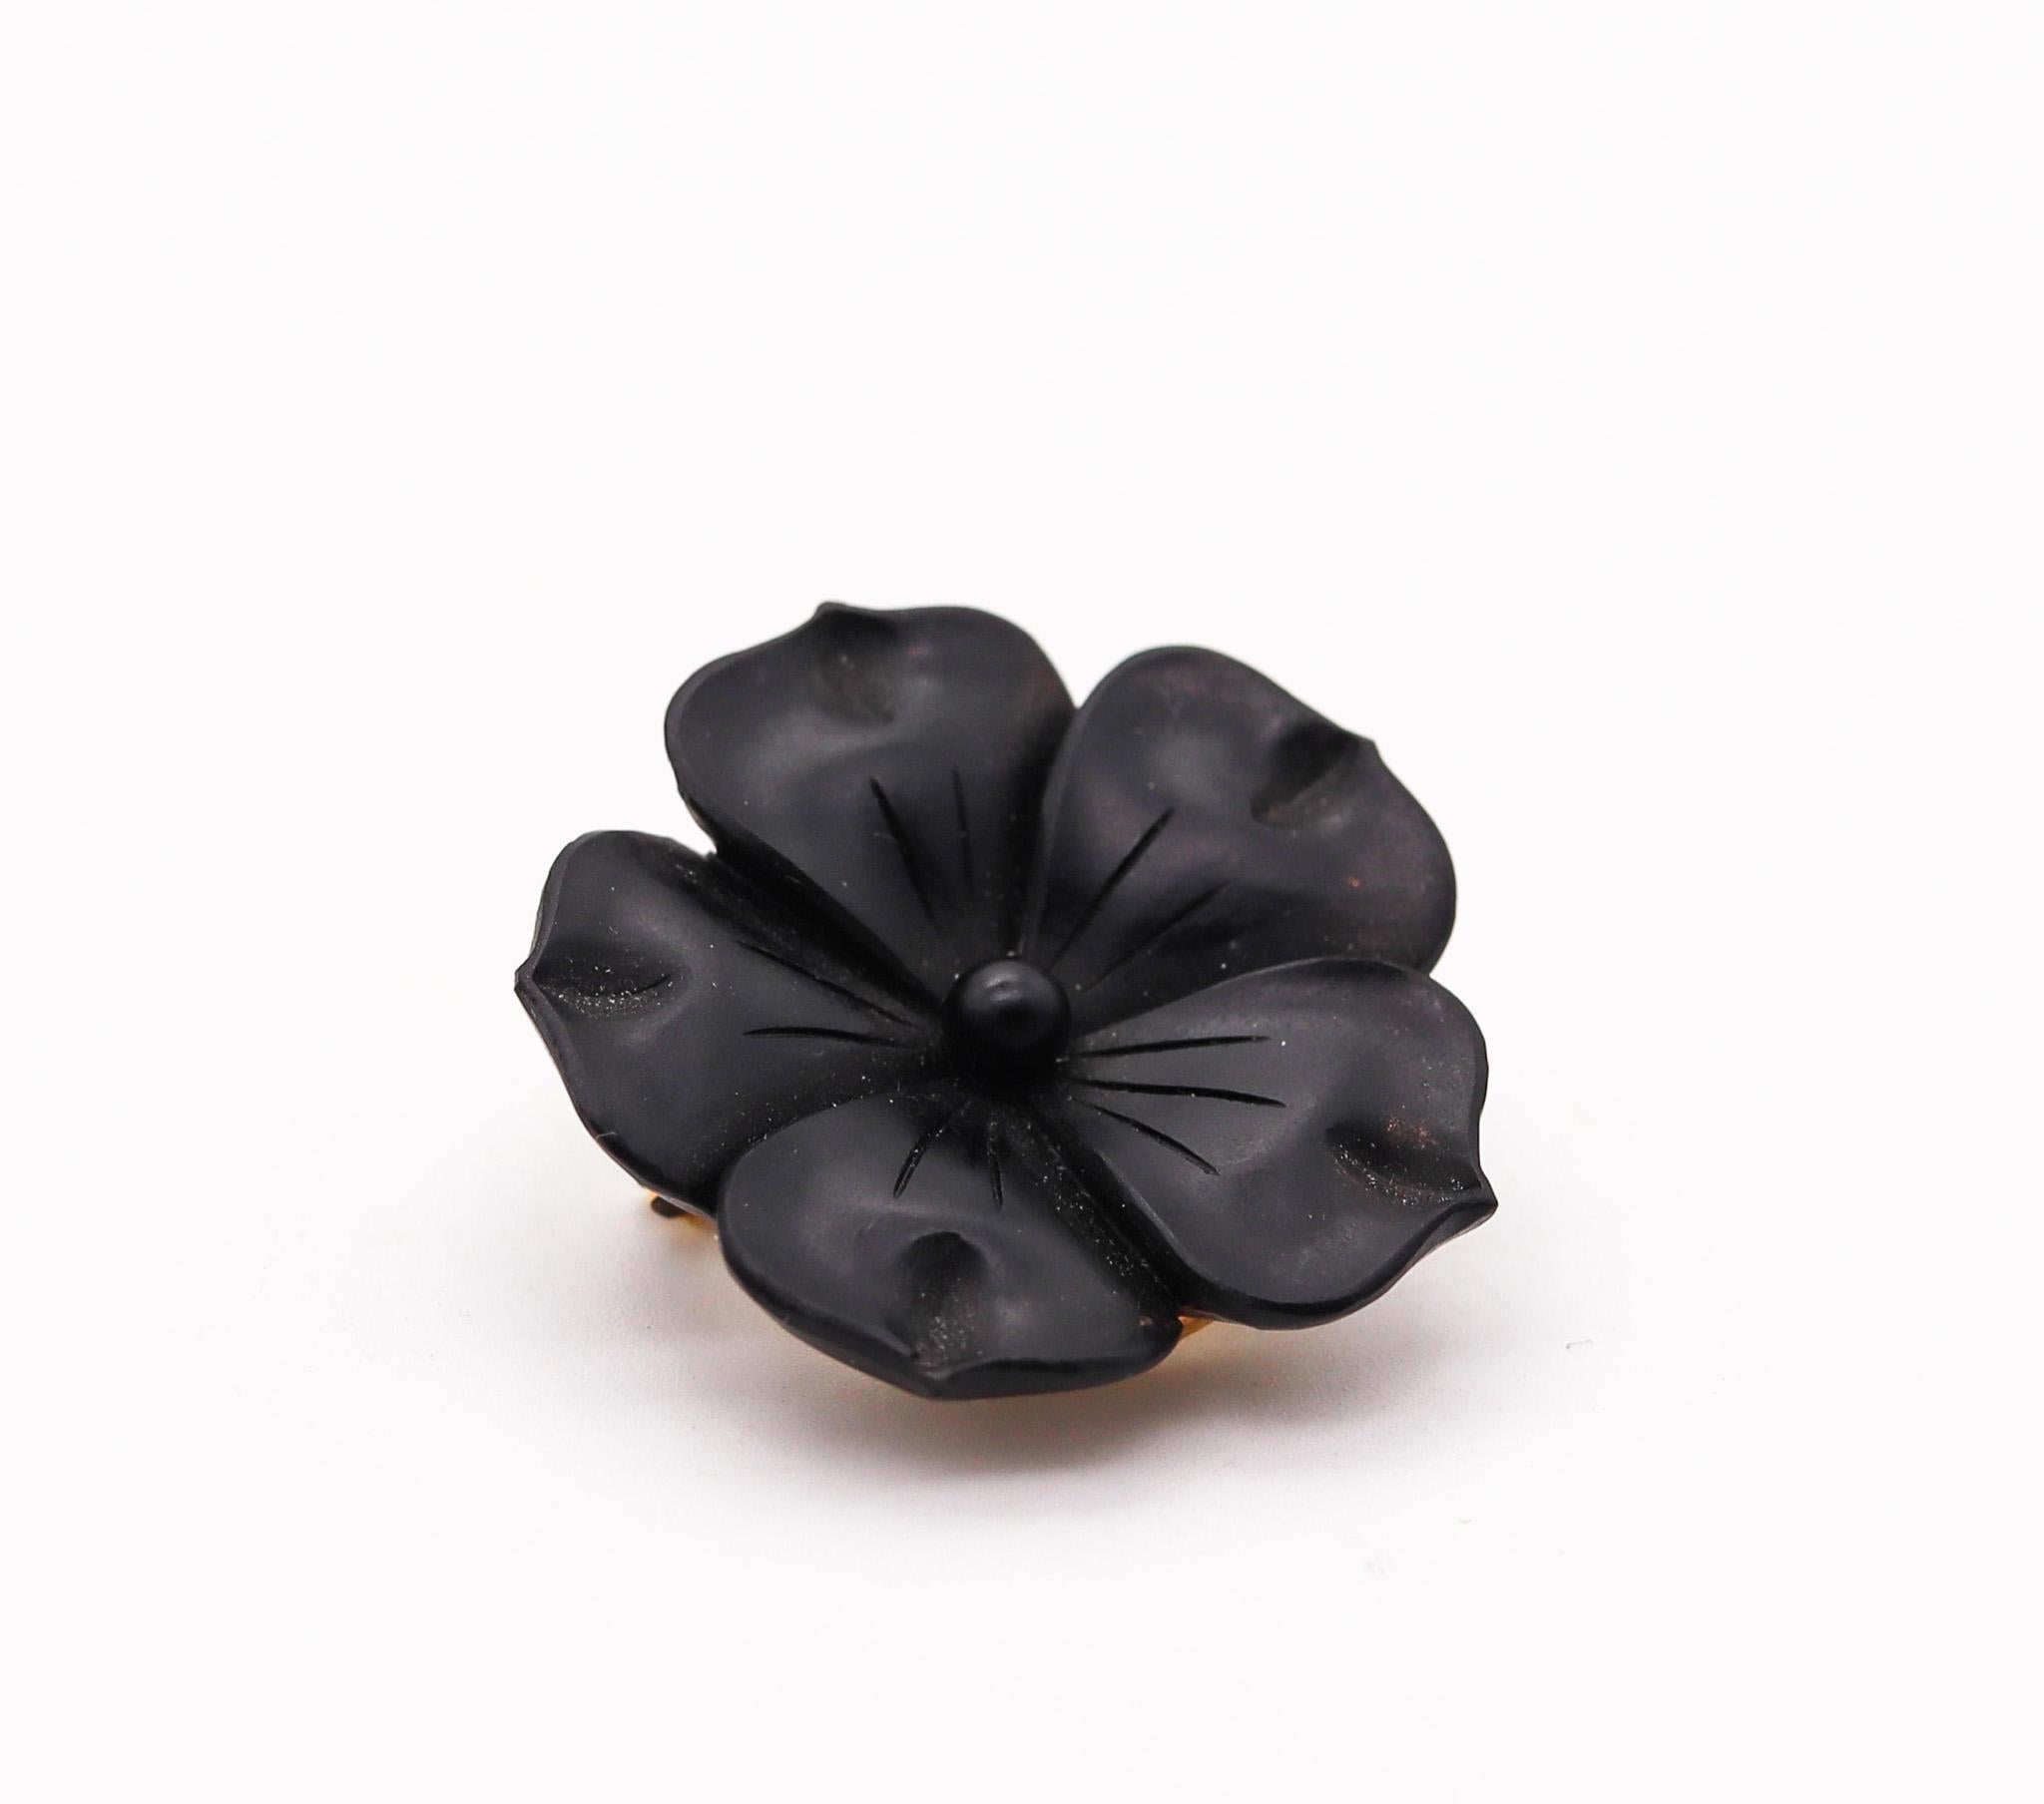 A French Edwardian art nouveau flower brooch.

Beautiful three-dimensional piece, created in Paris France during the Edwardian and the Art Nouveau periods, back in the 1900-1910. This beautiful  flower has been carefully carved from natural black